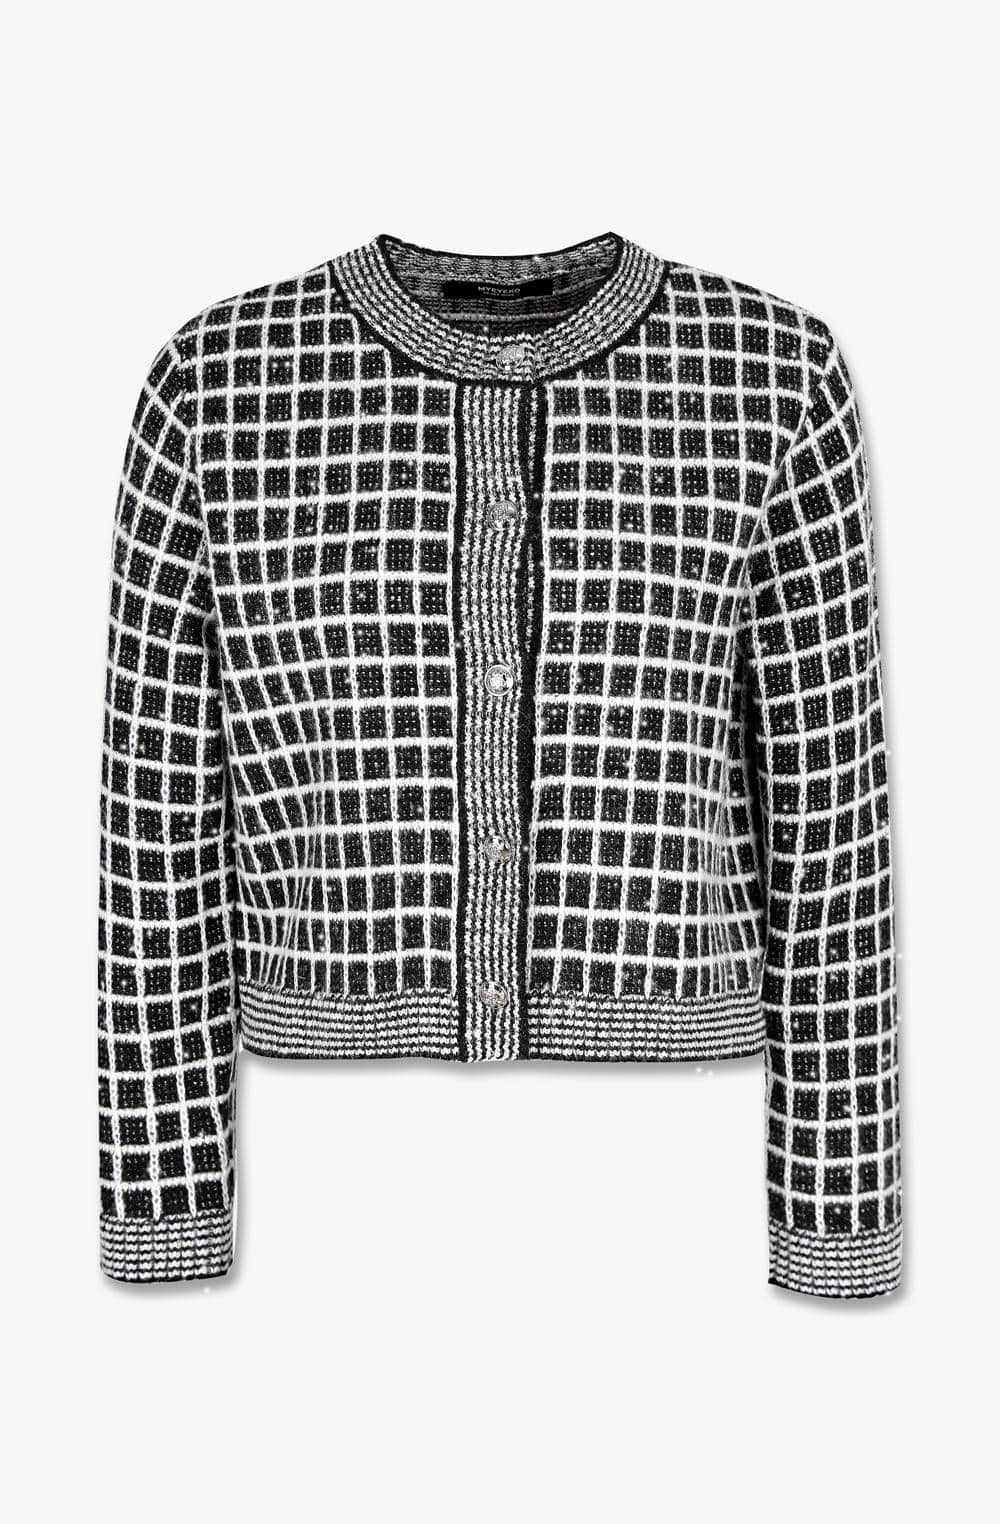 HIGH QUALITY LINE - BARRIE SEQUIN TWEED KNIT CARDIGAN (BLACK)